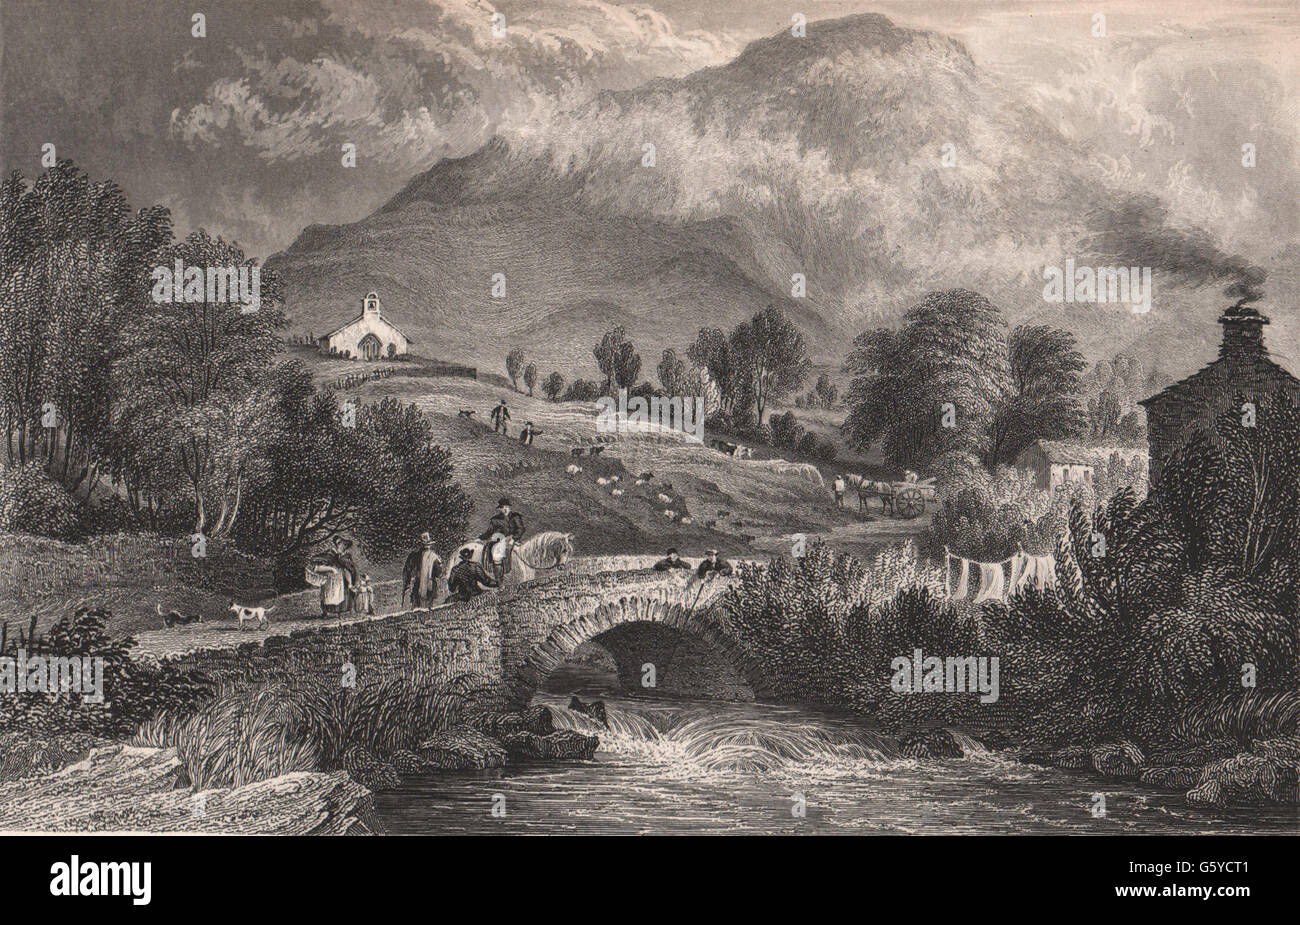 LAKE DISTRICT: Mühle Beck & Buttermere Kapelle, Cumberland. Cumbria, print 1839 Stockfoto